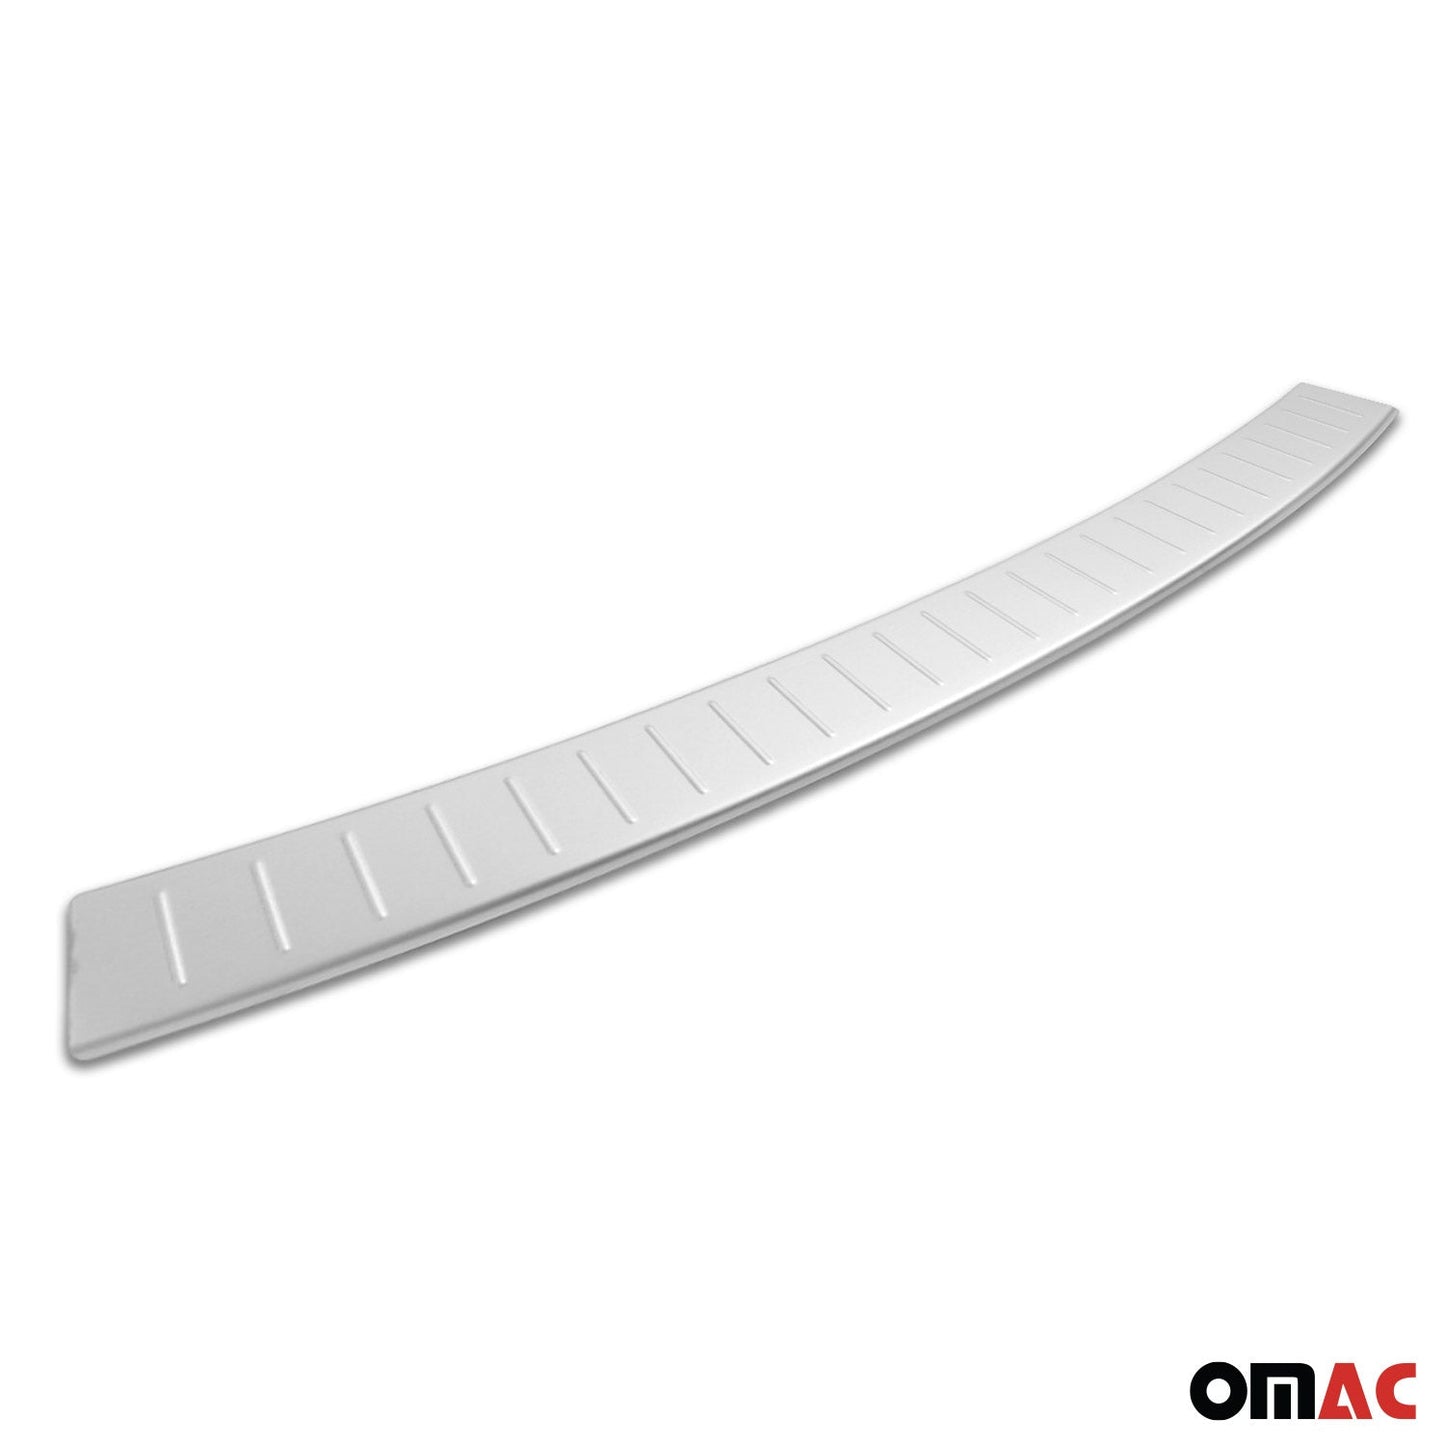 OMAC Rear Bumper Sill Cover Protector Guard for VW Golf MK8 2022-2024 Brushed Steel K-7568093T